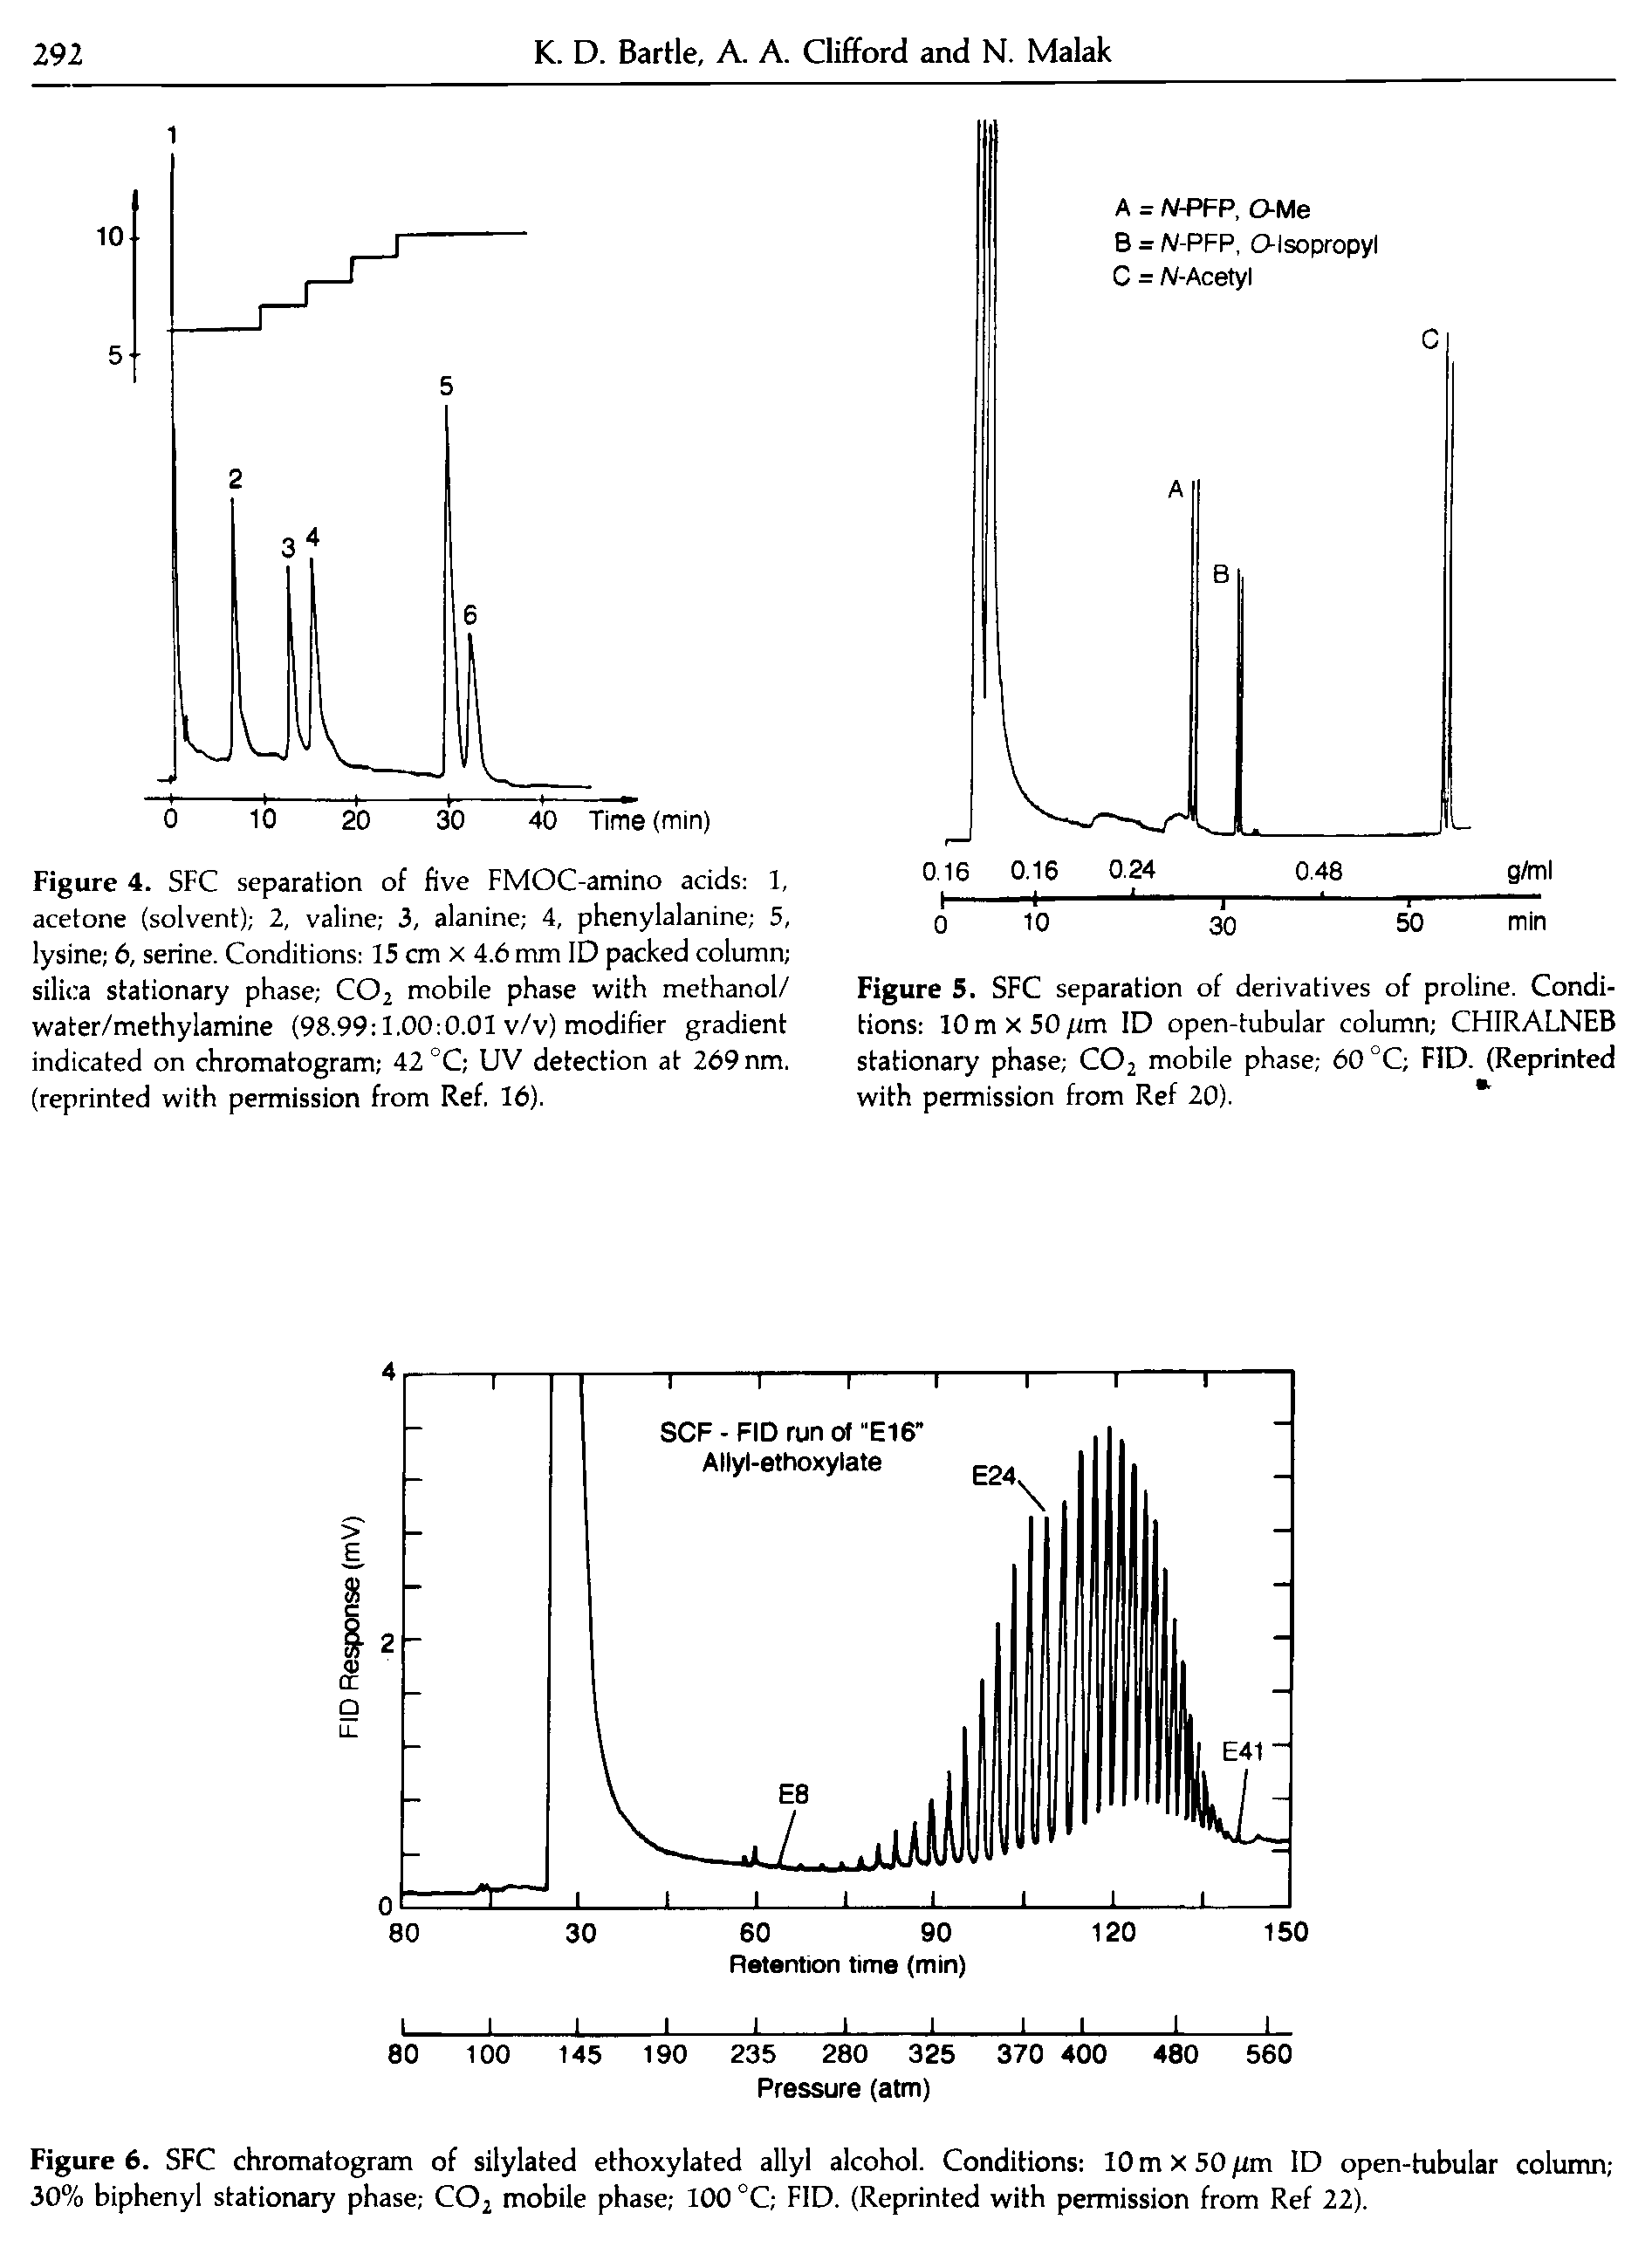 Figure 6. SFC chromatogram of silylated ethoxylated allyl alcohol. Conditions 10 m X 50 fim ID open-tubular column,-30% biphenyl stationary phase CO2 mobile phase 100 °C FID. (Reprinted with permission from Ref 22).